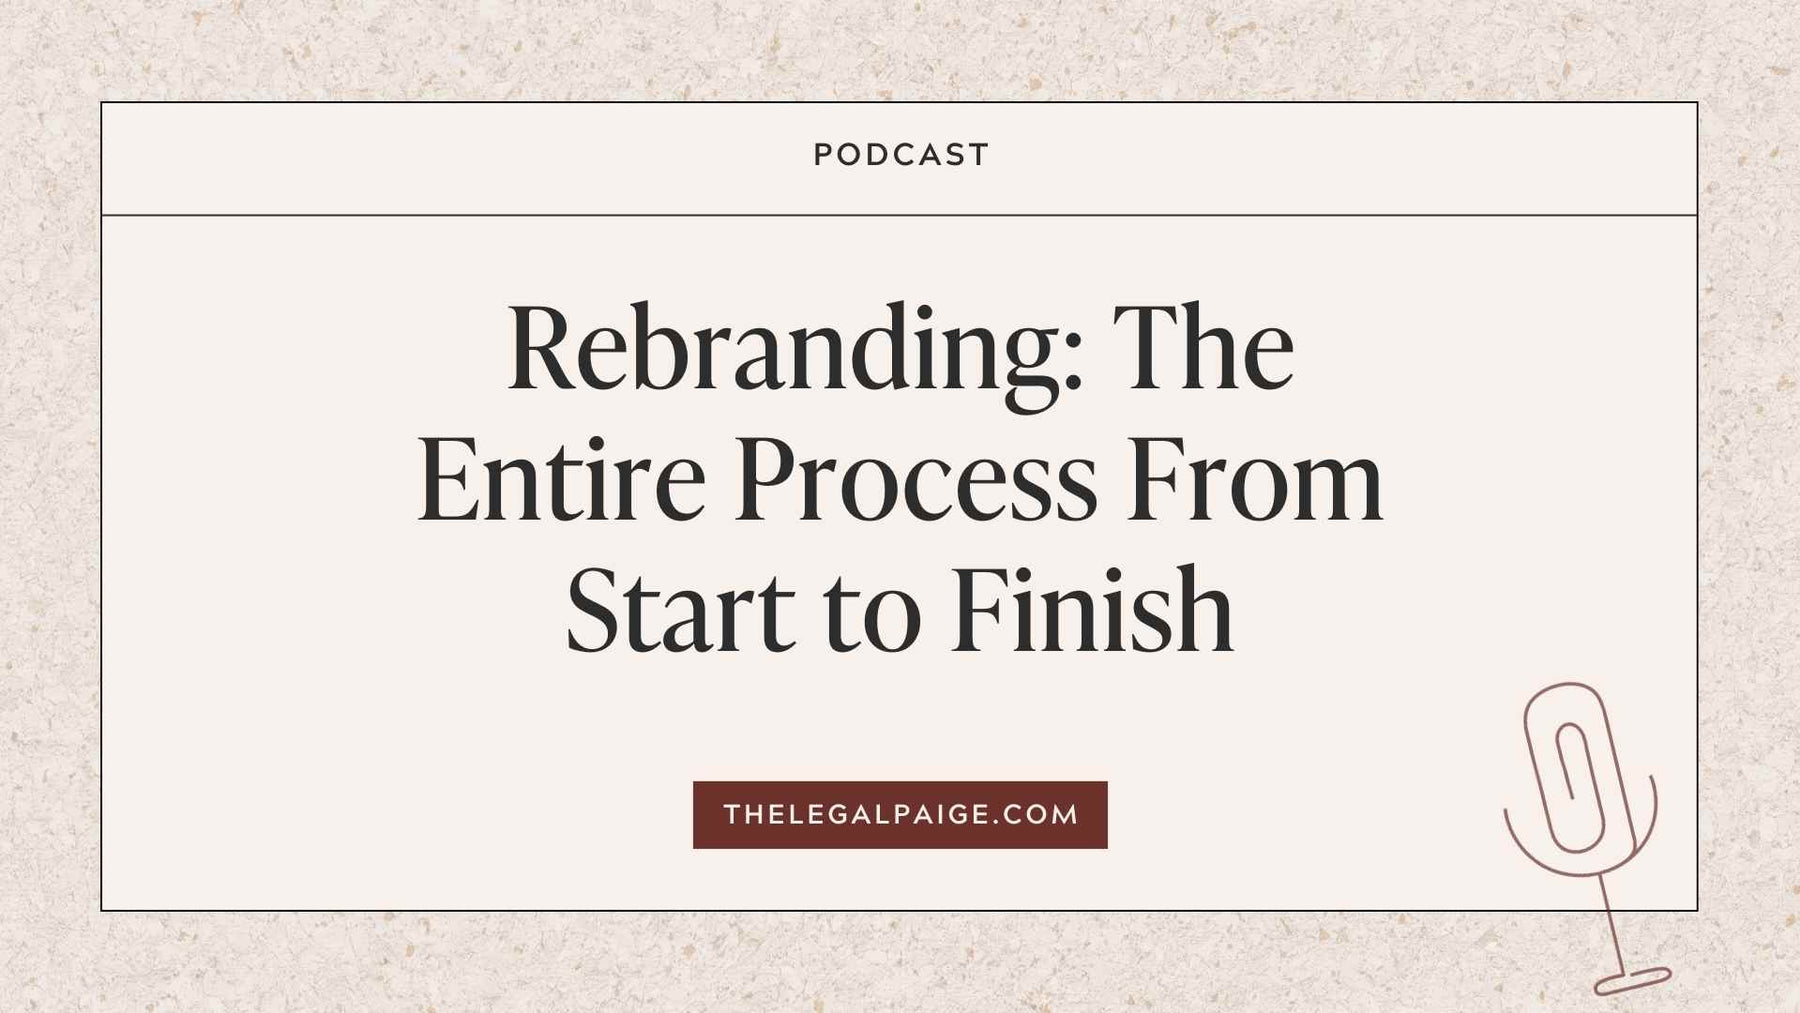 Episode 61: Rebranding: The Entire Process From Start to Finish